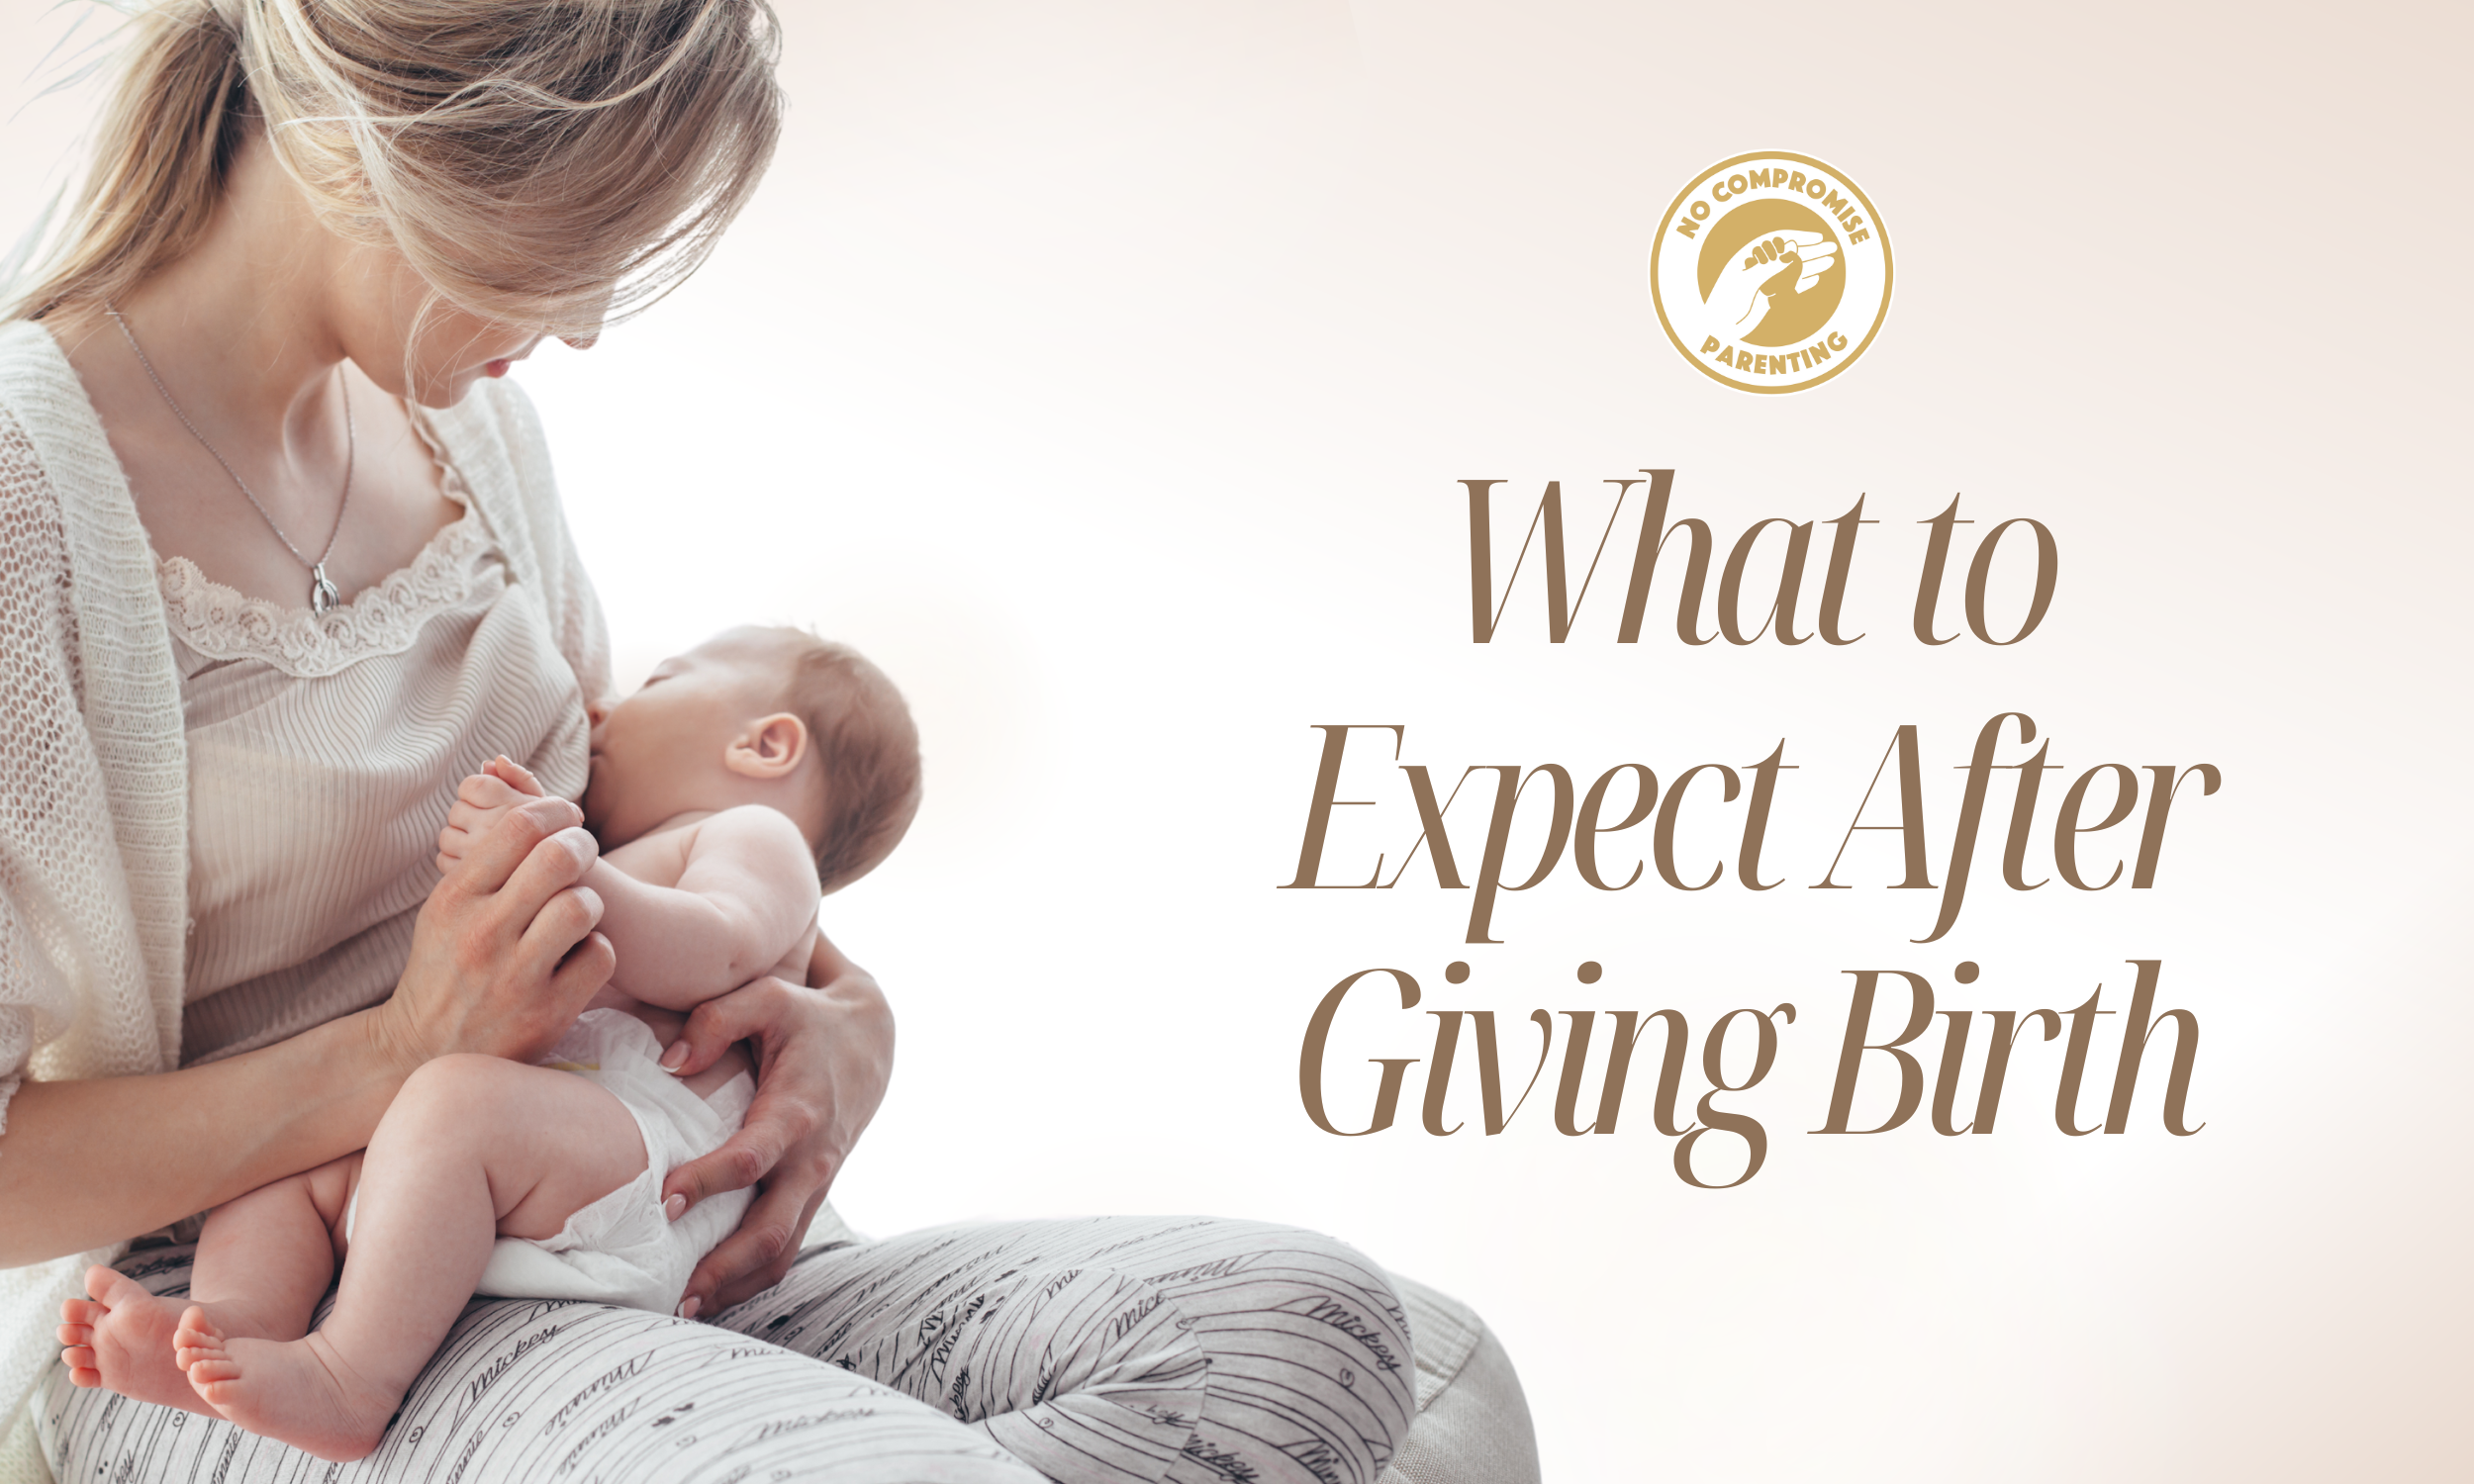 What to Expect After Giving Birth